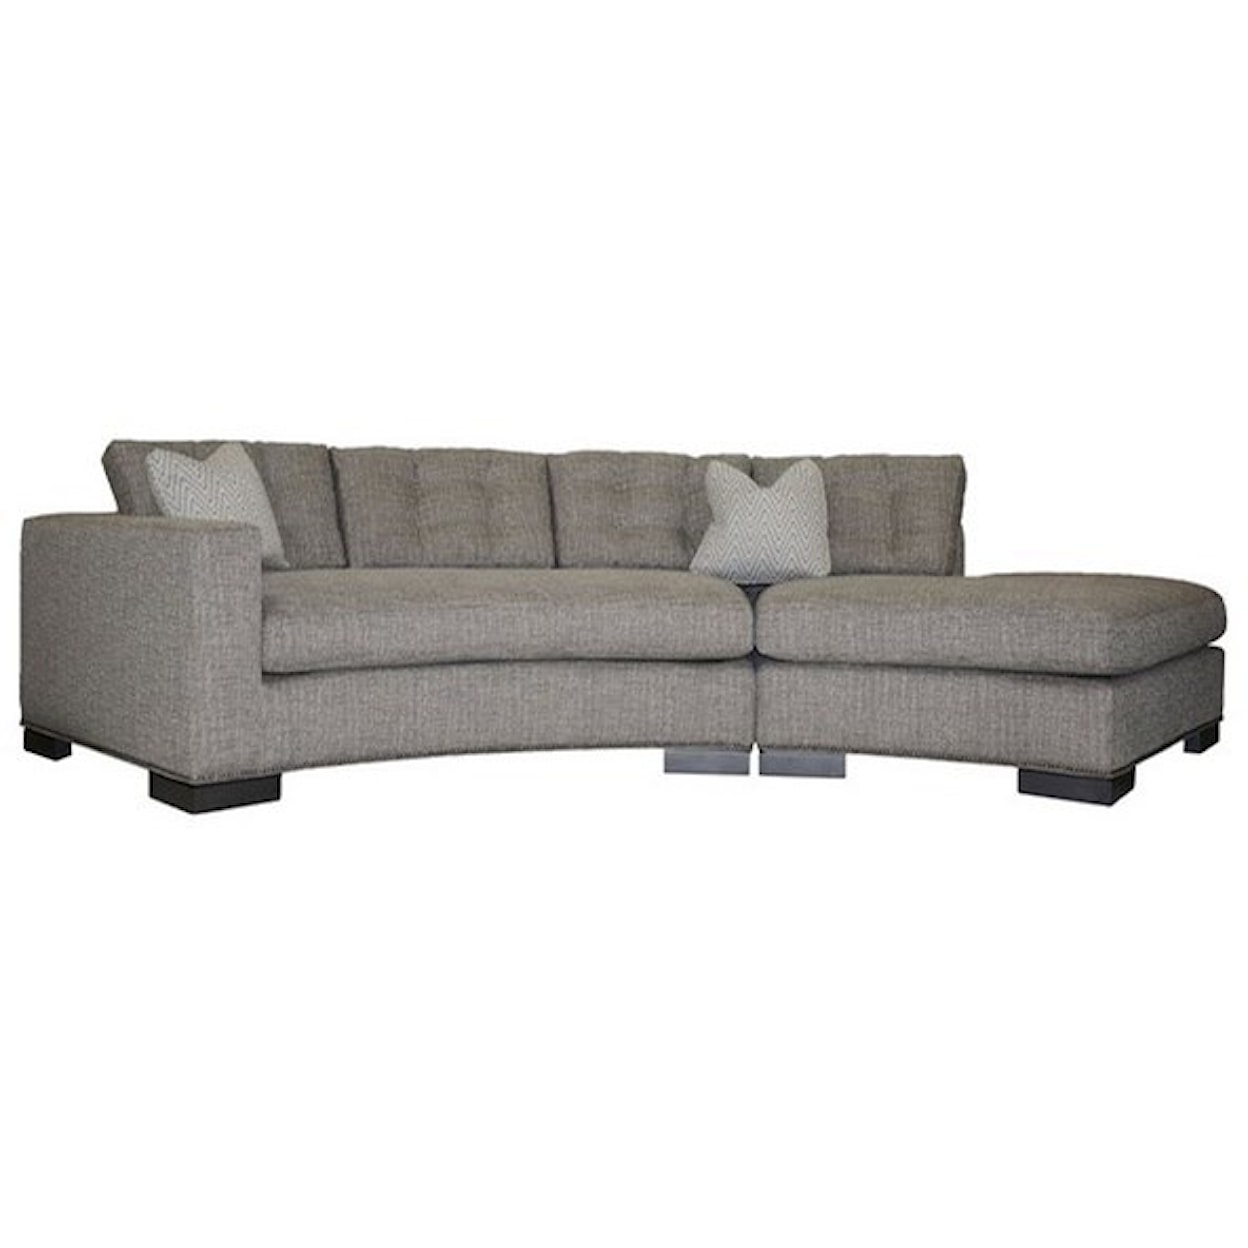 Vanguard Furniture Michael Weiss Transitional Loveseat with Chaise